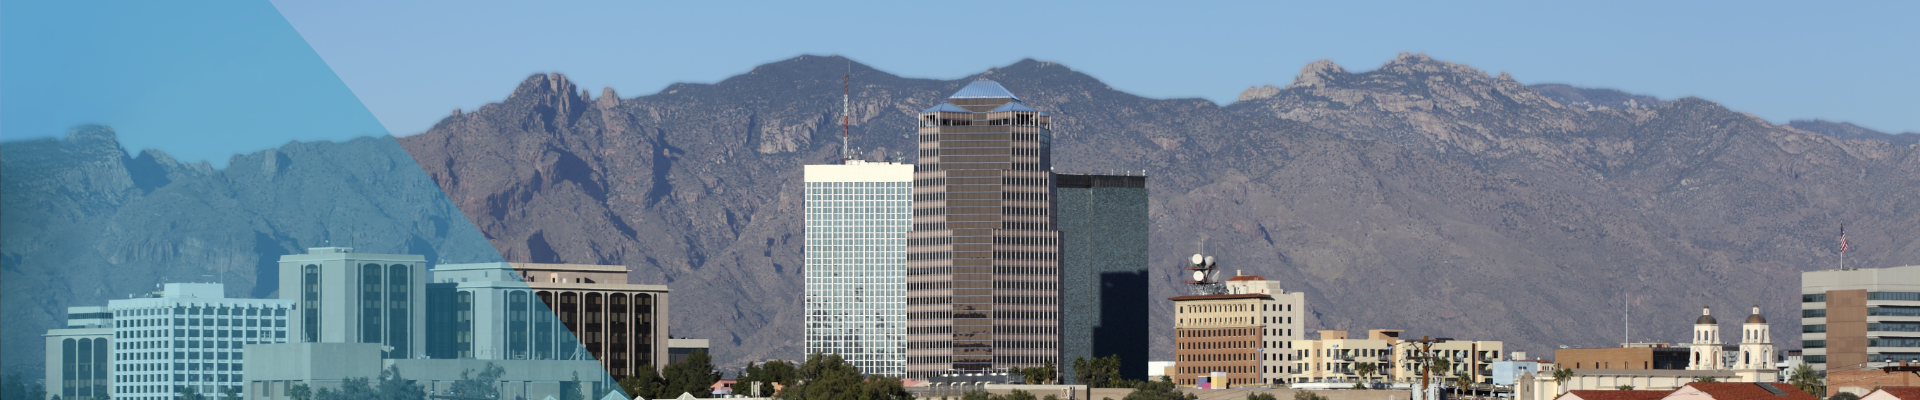 Tucson skyline with mountains behind